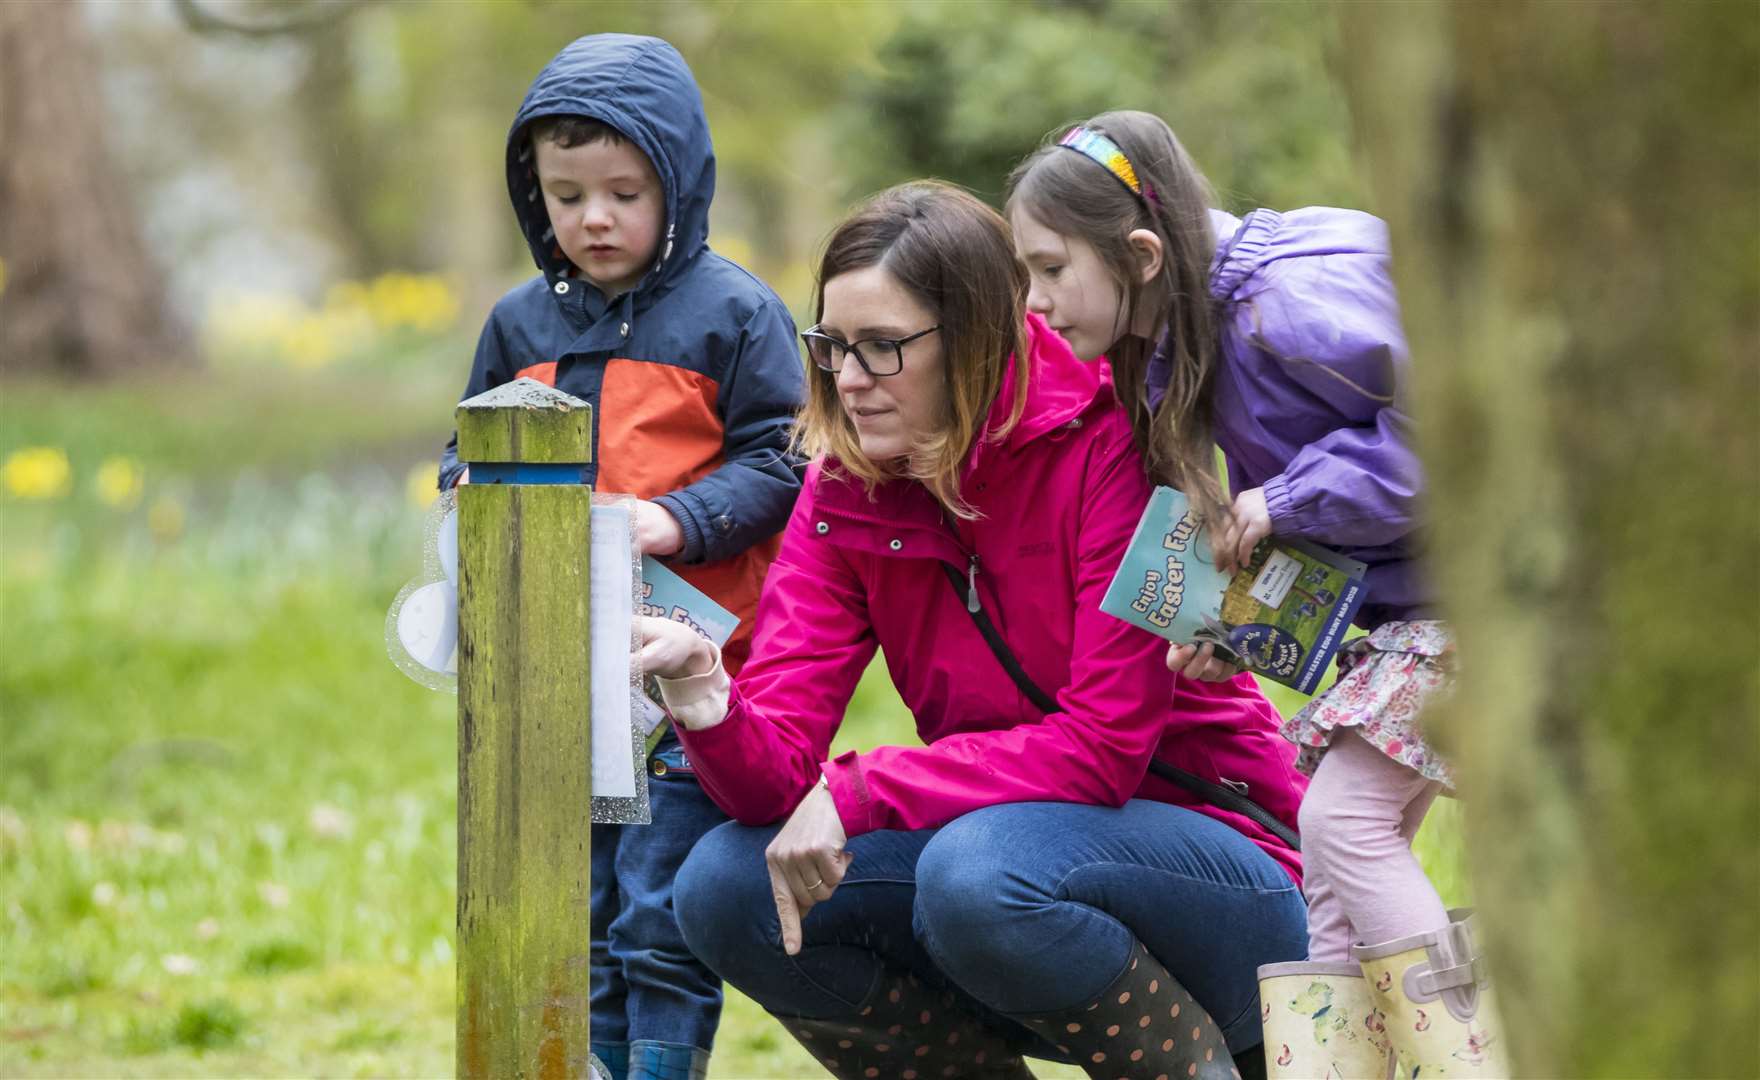 Visitors on an Easter egg hunt with Cadbury and the National Trust